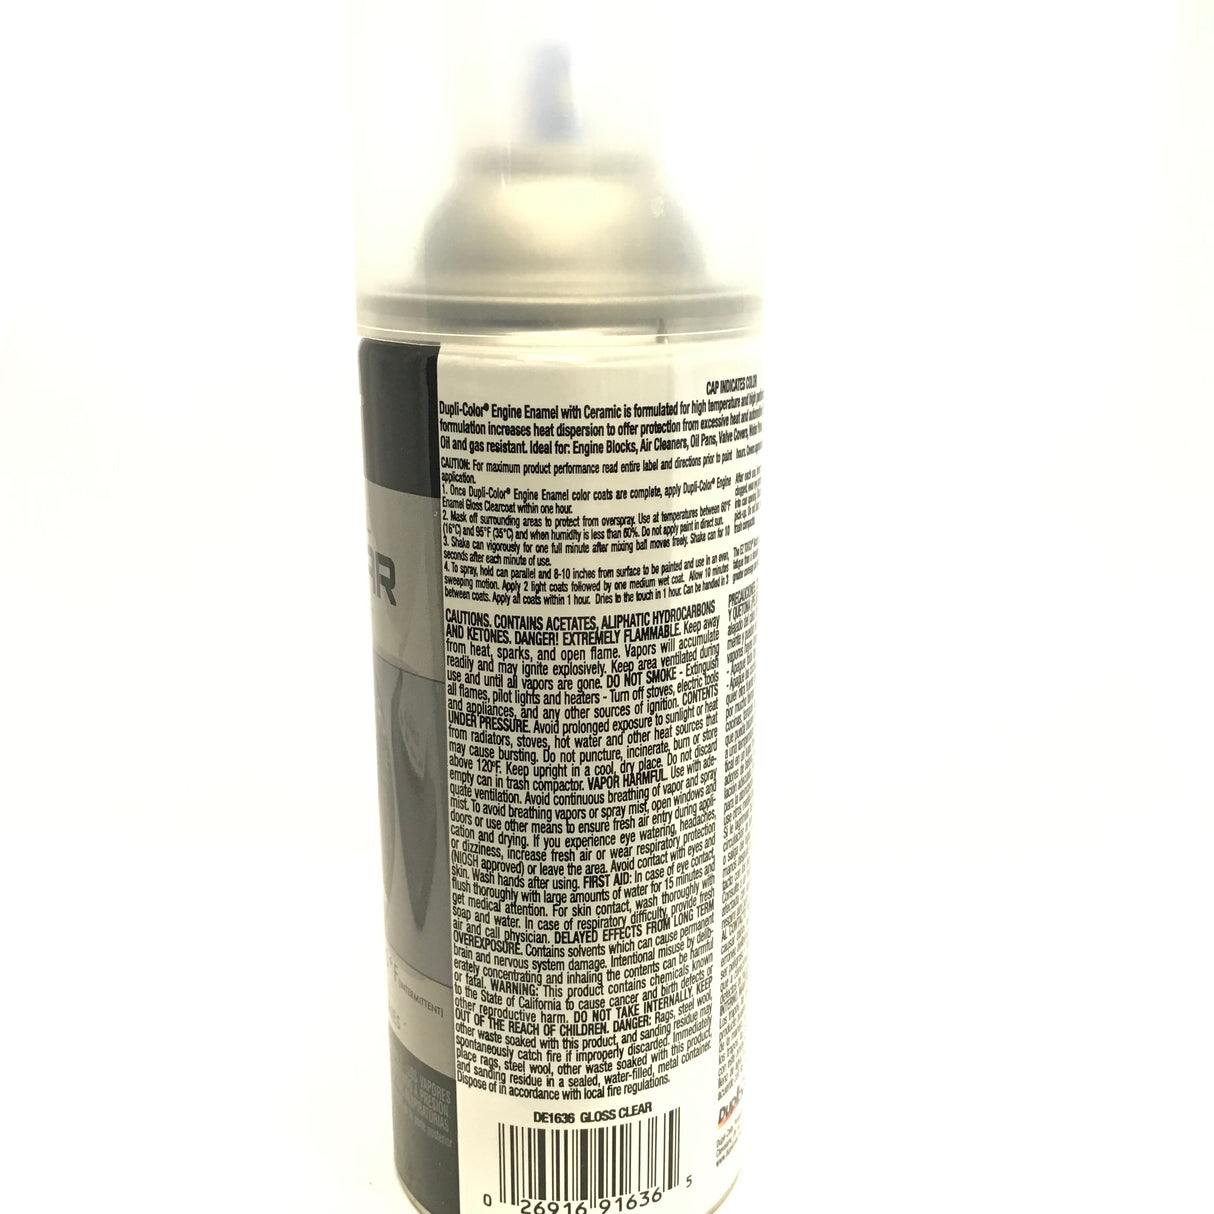 Duplicolor DE1636-3 PACK Engine Enamel with Ceramic Gloss Clear color - 12 oz Aerosol Can